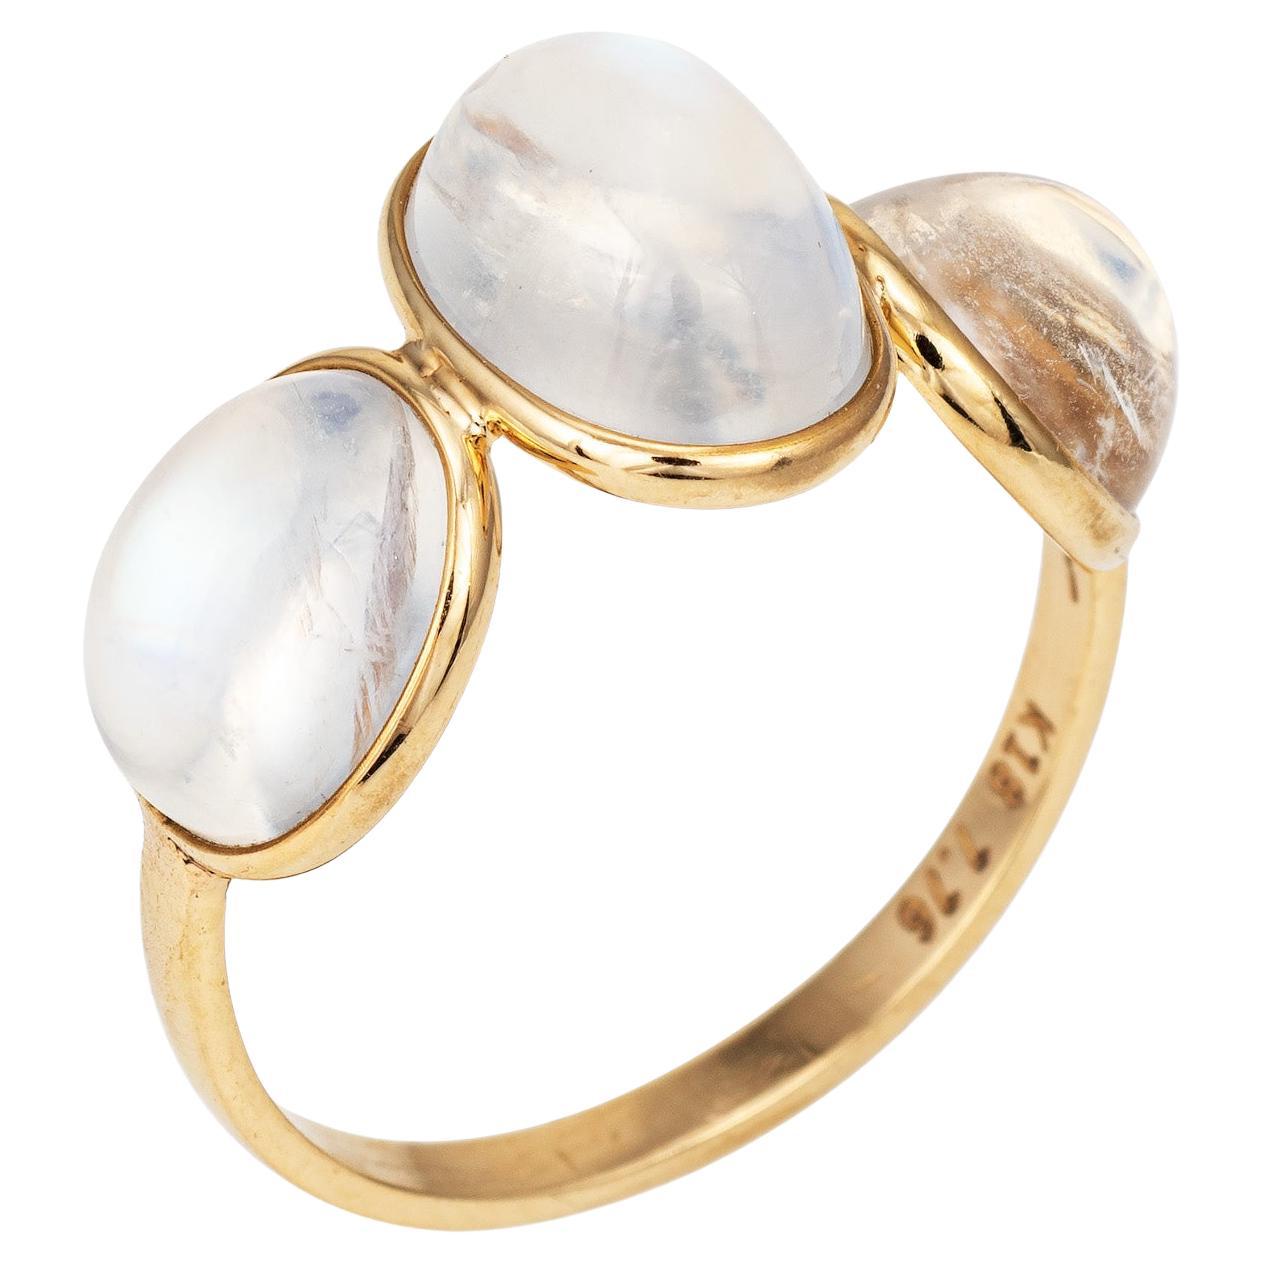 Rainbow Moonstone Ring Estate 18k Yellow Gold 3 Stone Band Fine Jewelry Sz 7 For Sale